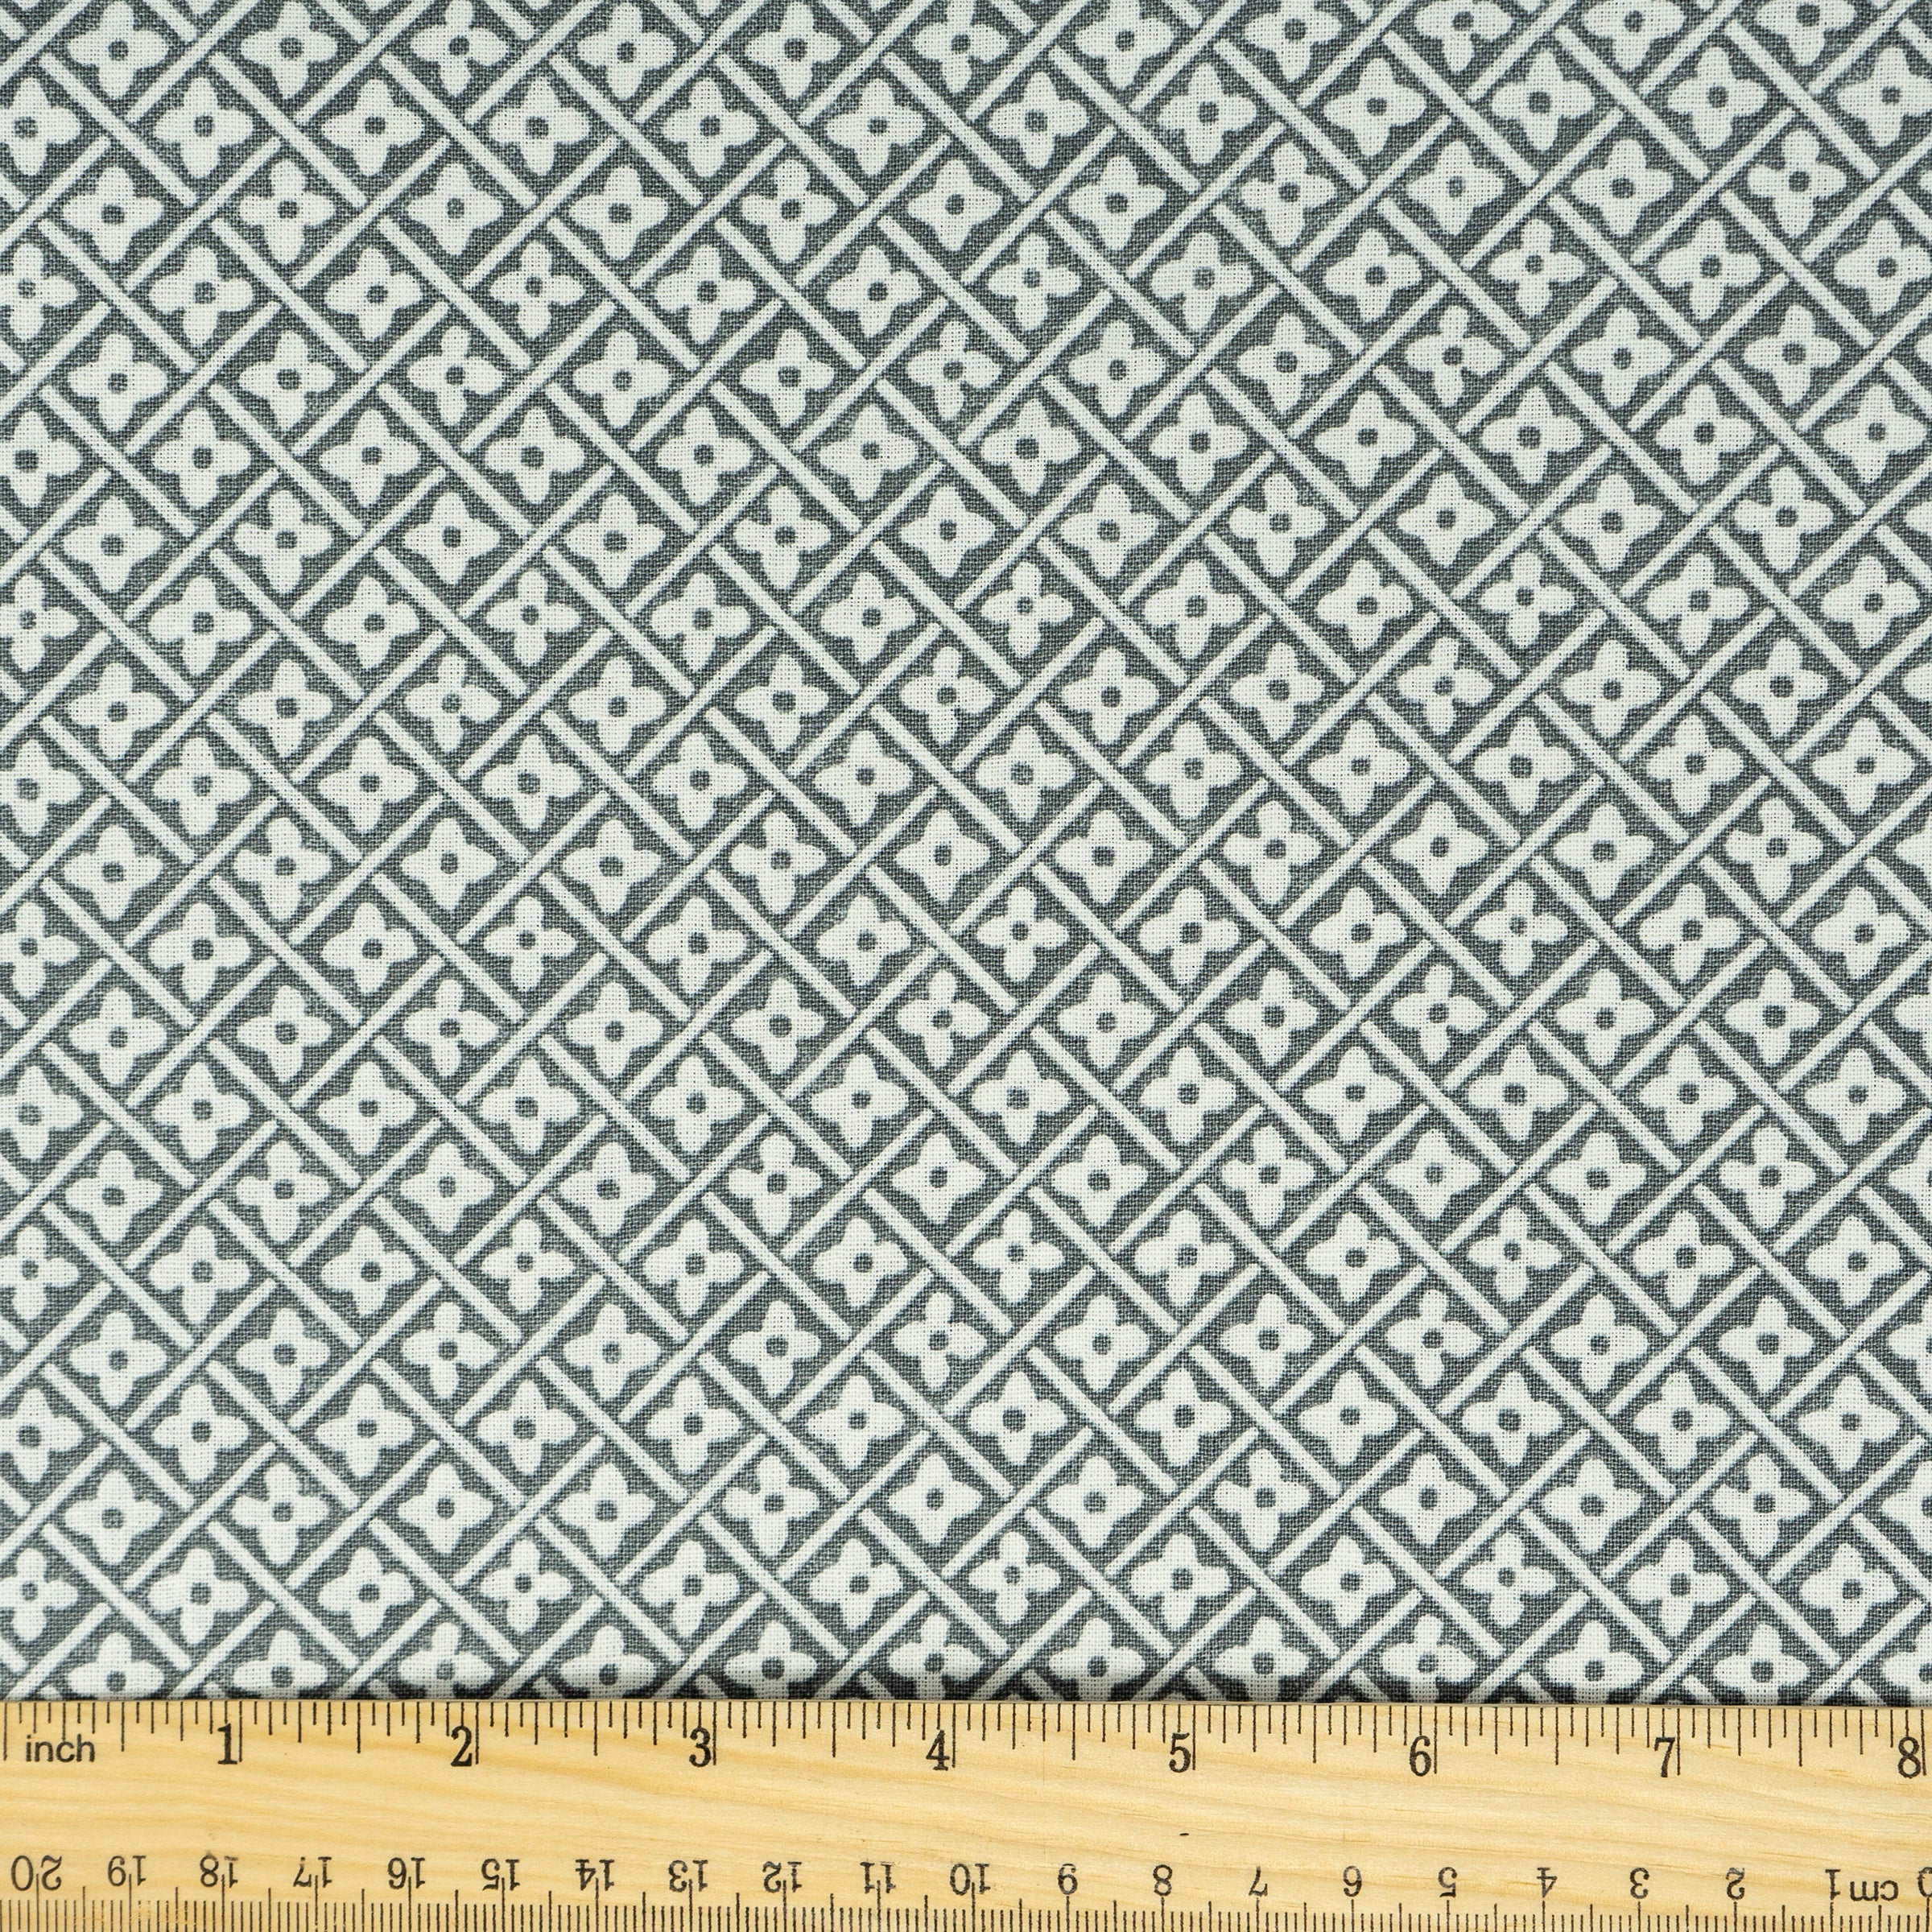 Waverly Inspirations 44" 100% Cotton Sewing & Craft Fabric By the Yard, Steel